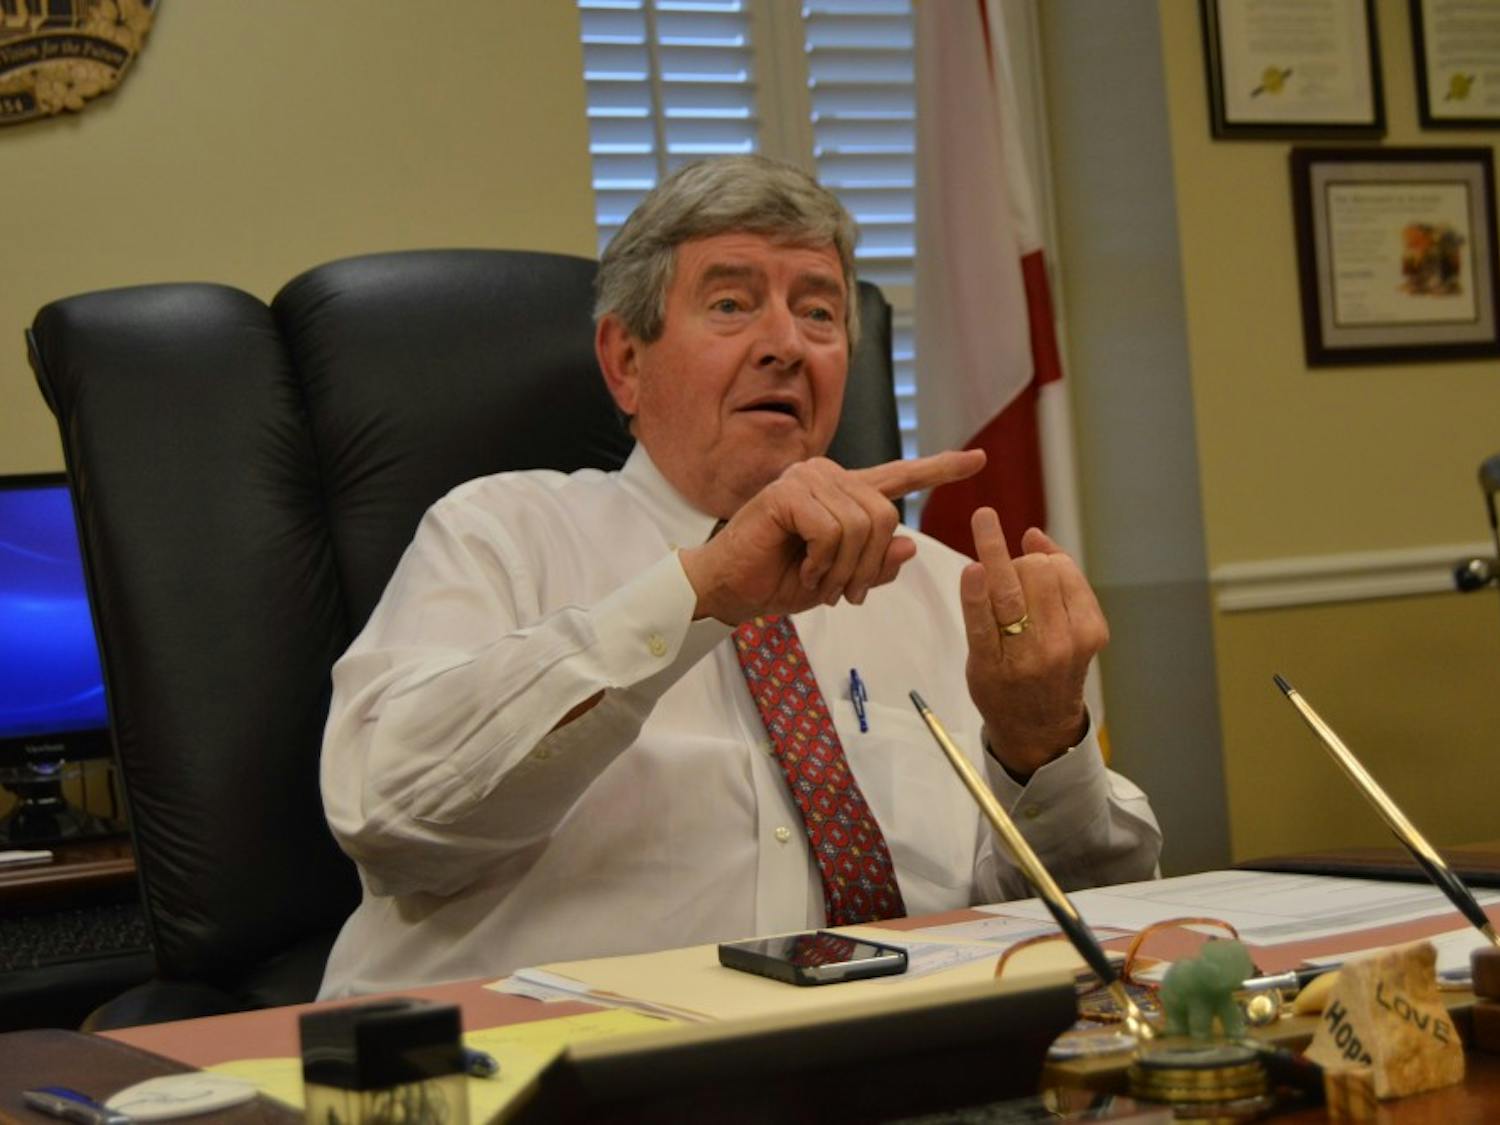 Opelika Mayor Gary Fuller is currently serving his fifth consecutive term.